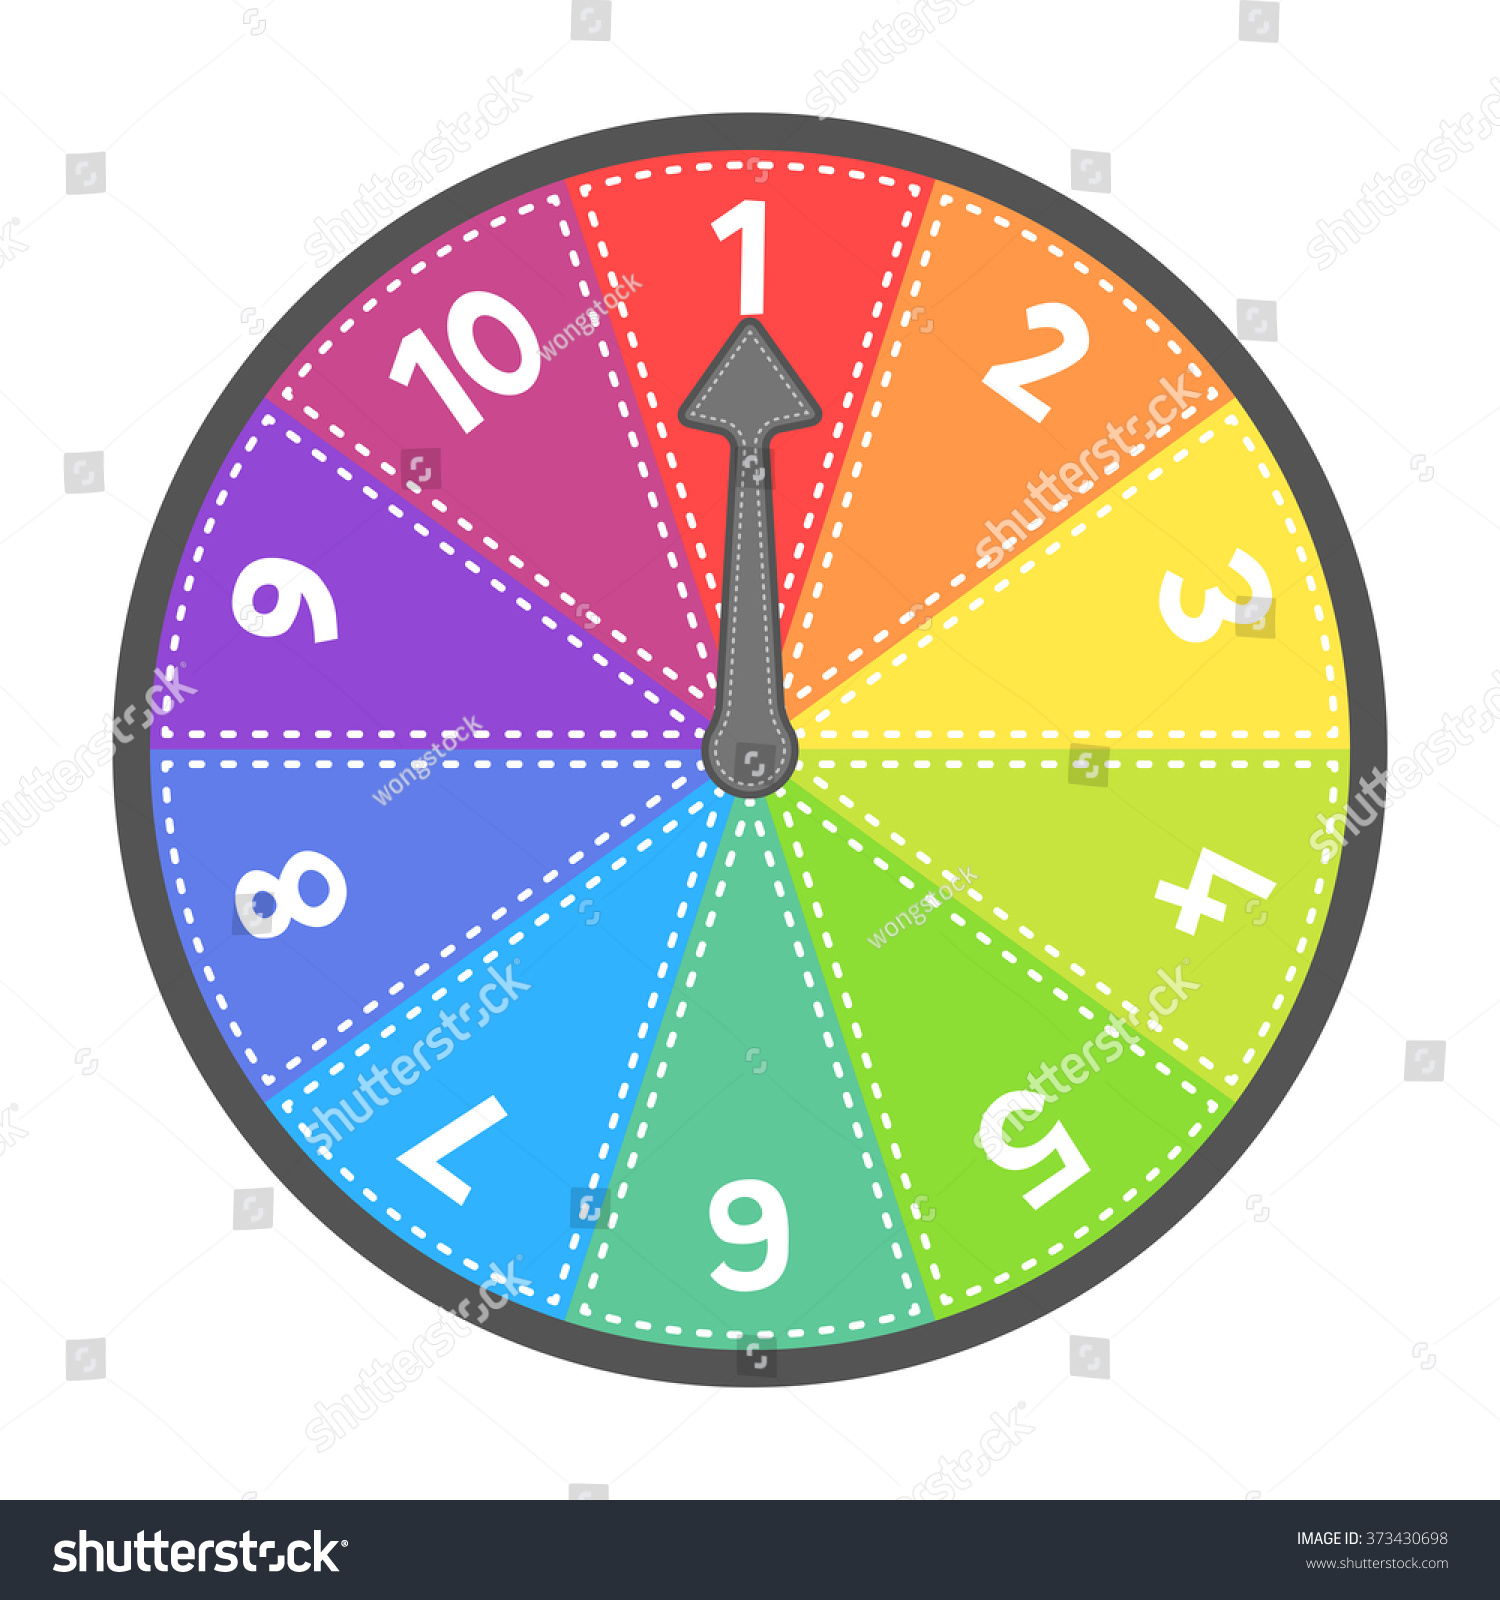 Spin the Wheel -38876